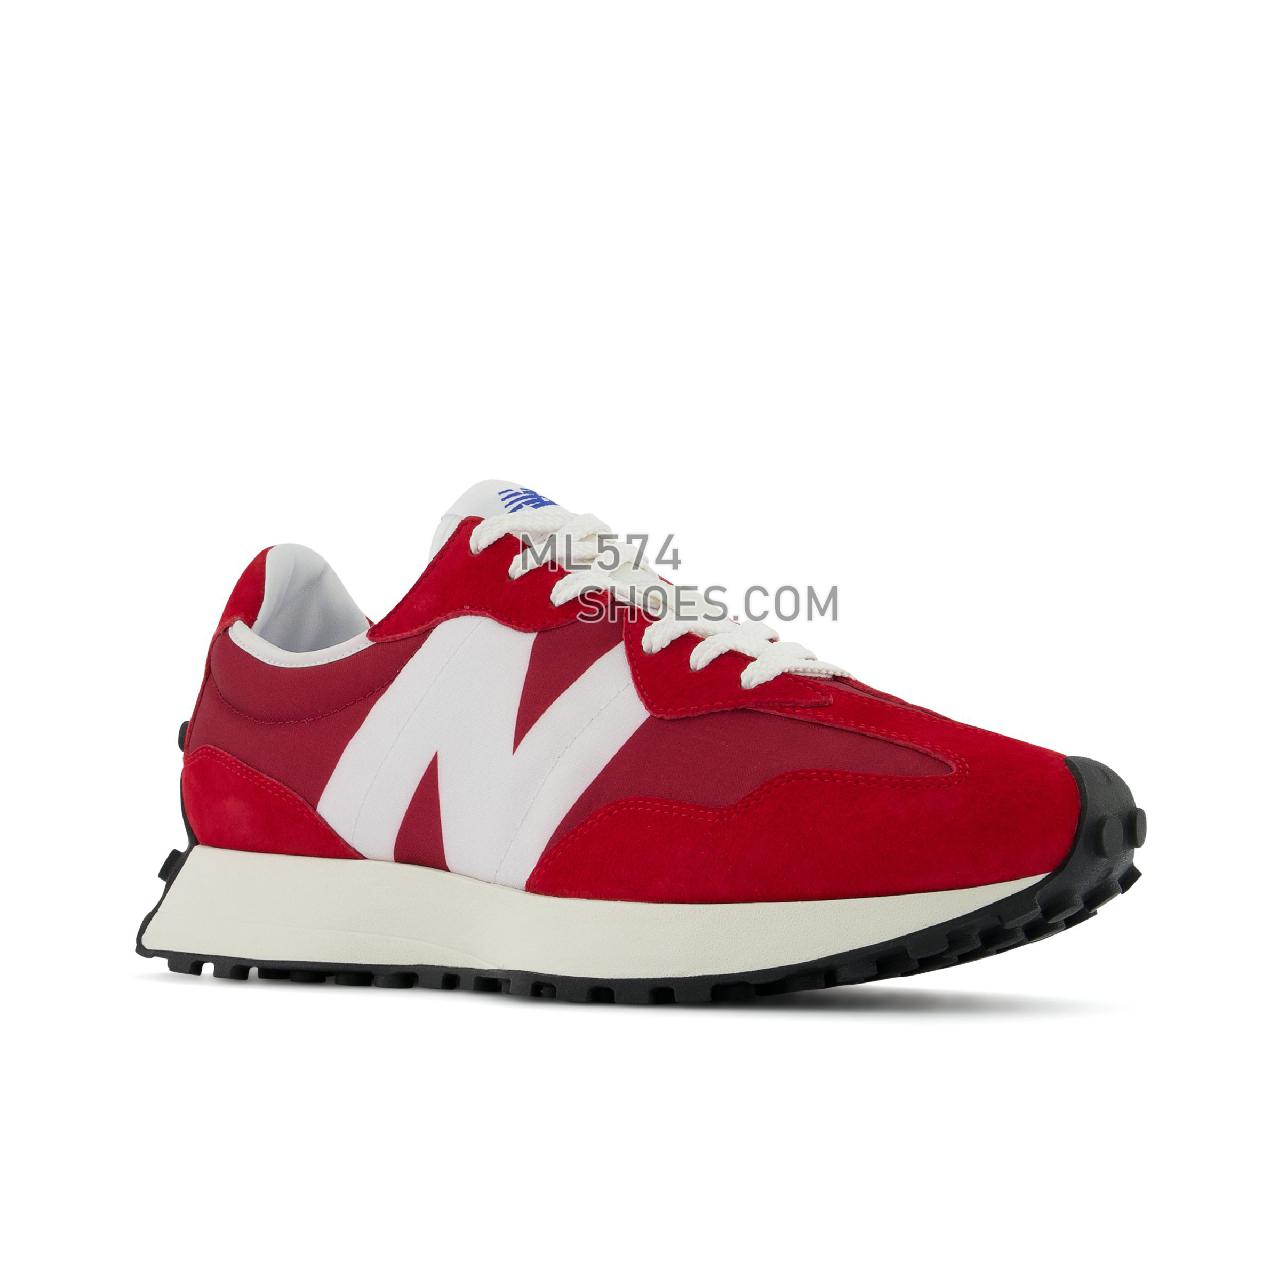 New Balance 327 - Men's Sport Style Sneakers - Nb Scarlet with Team Red - MS327LD1